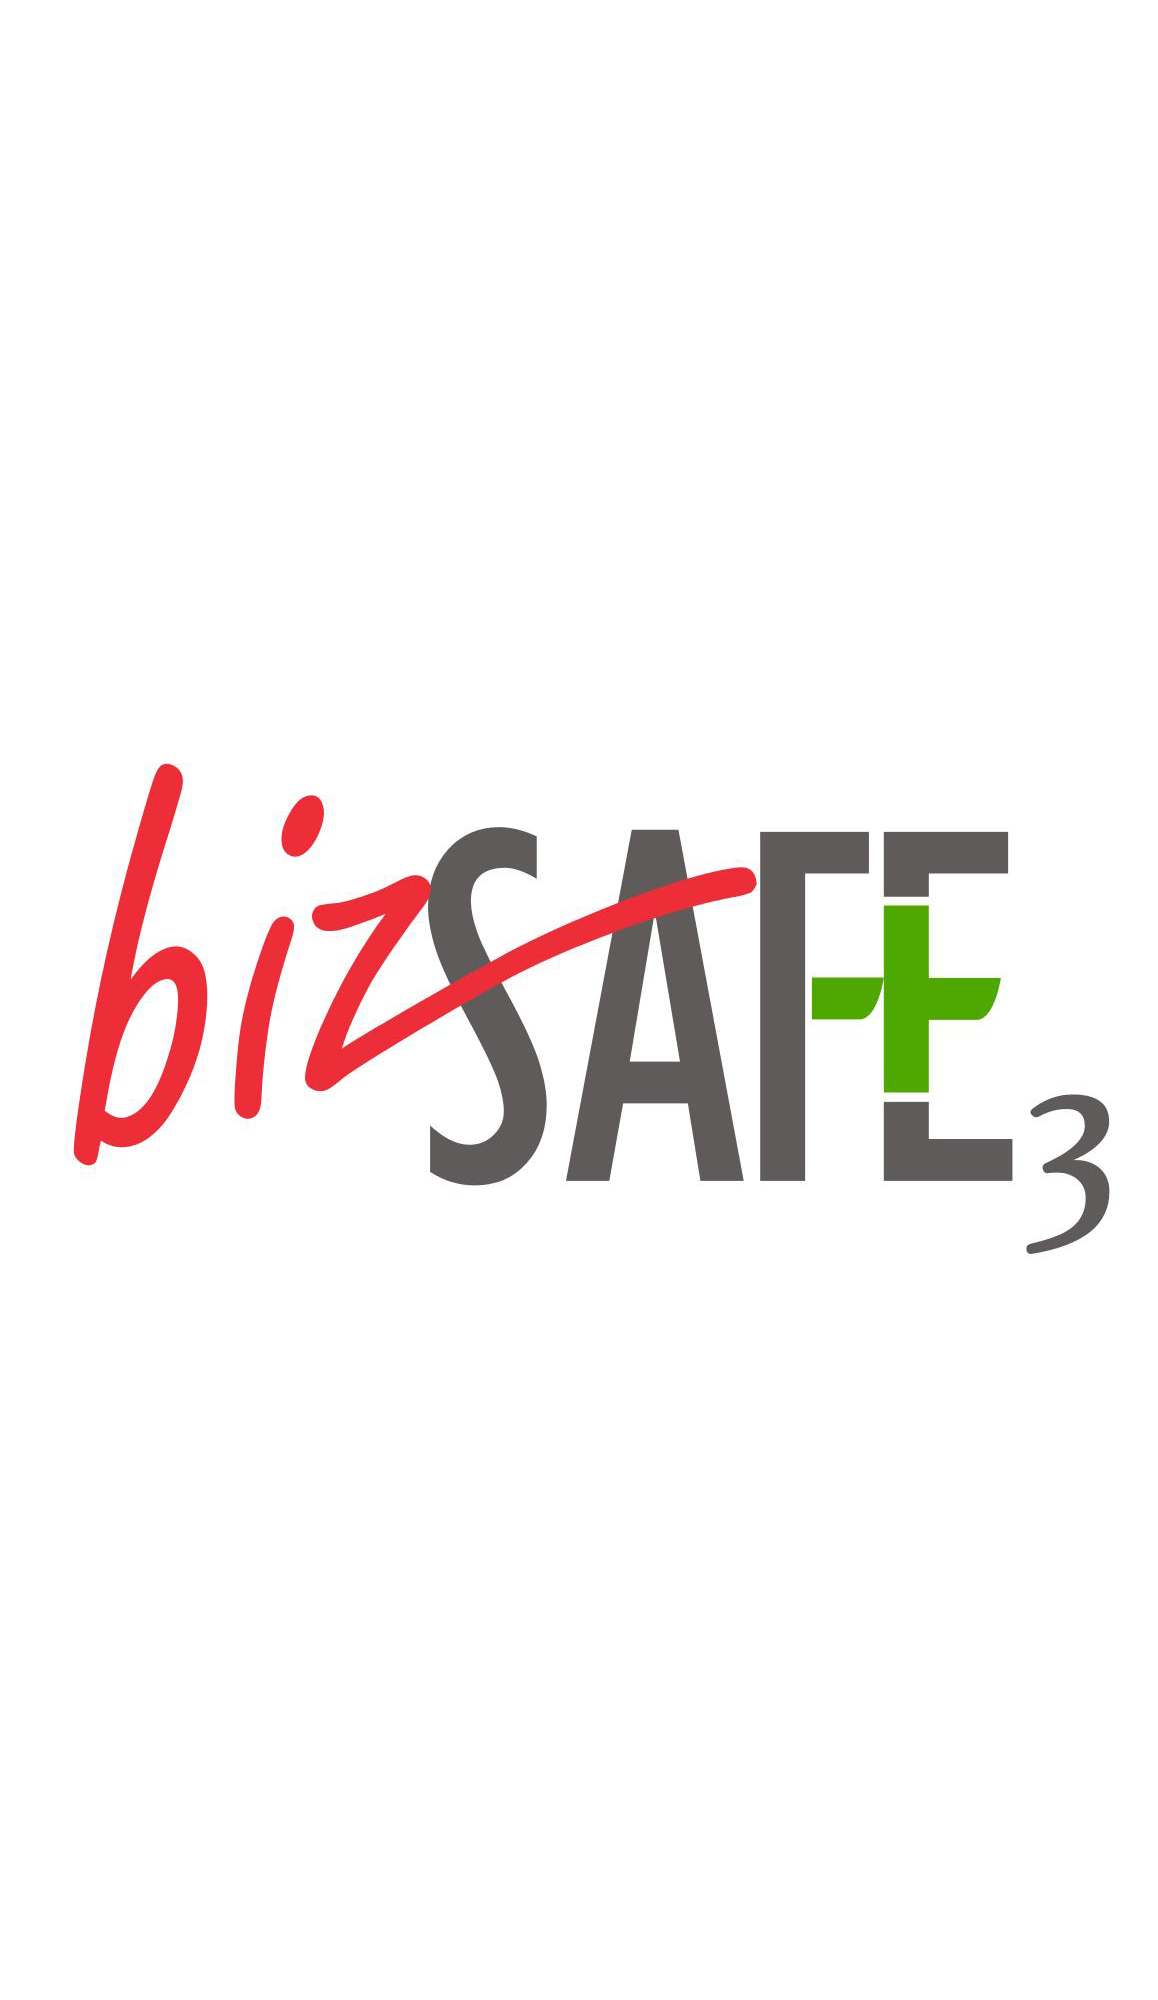 Walraven has been honored with the BizSafe Award.